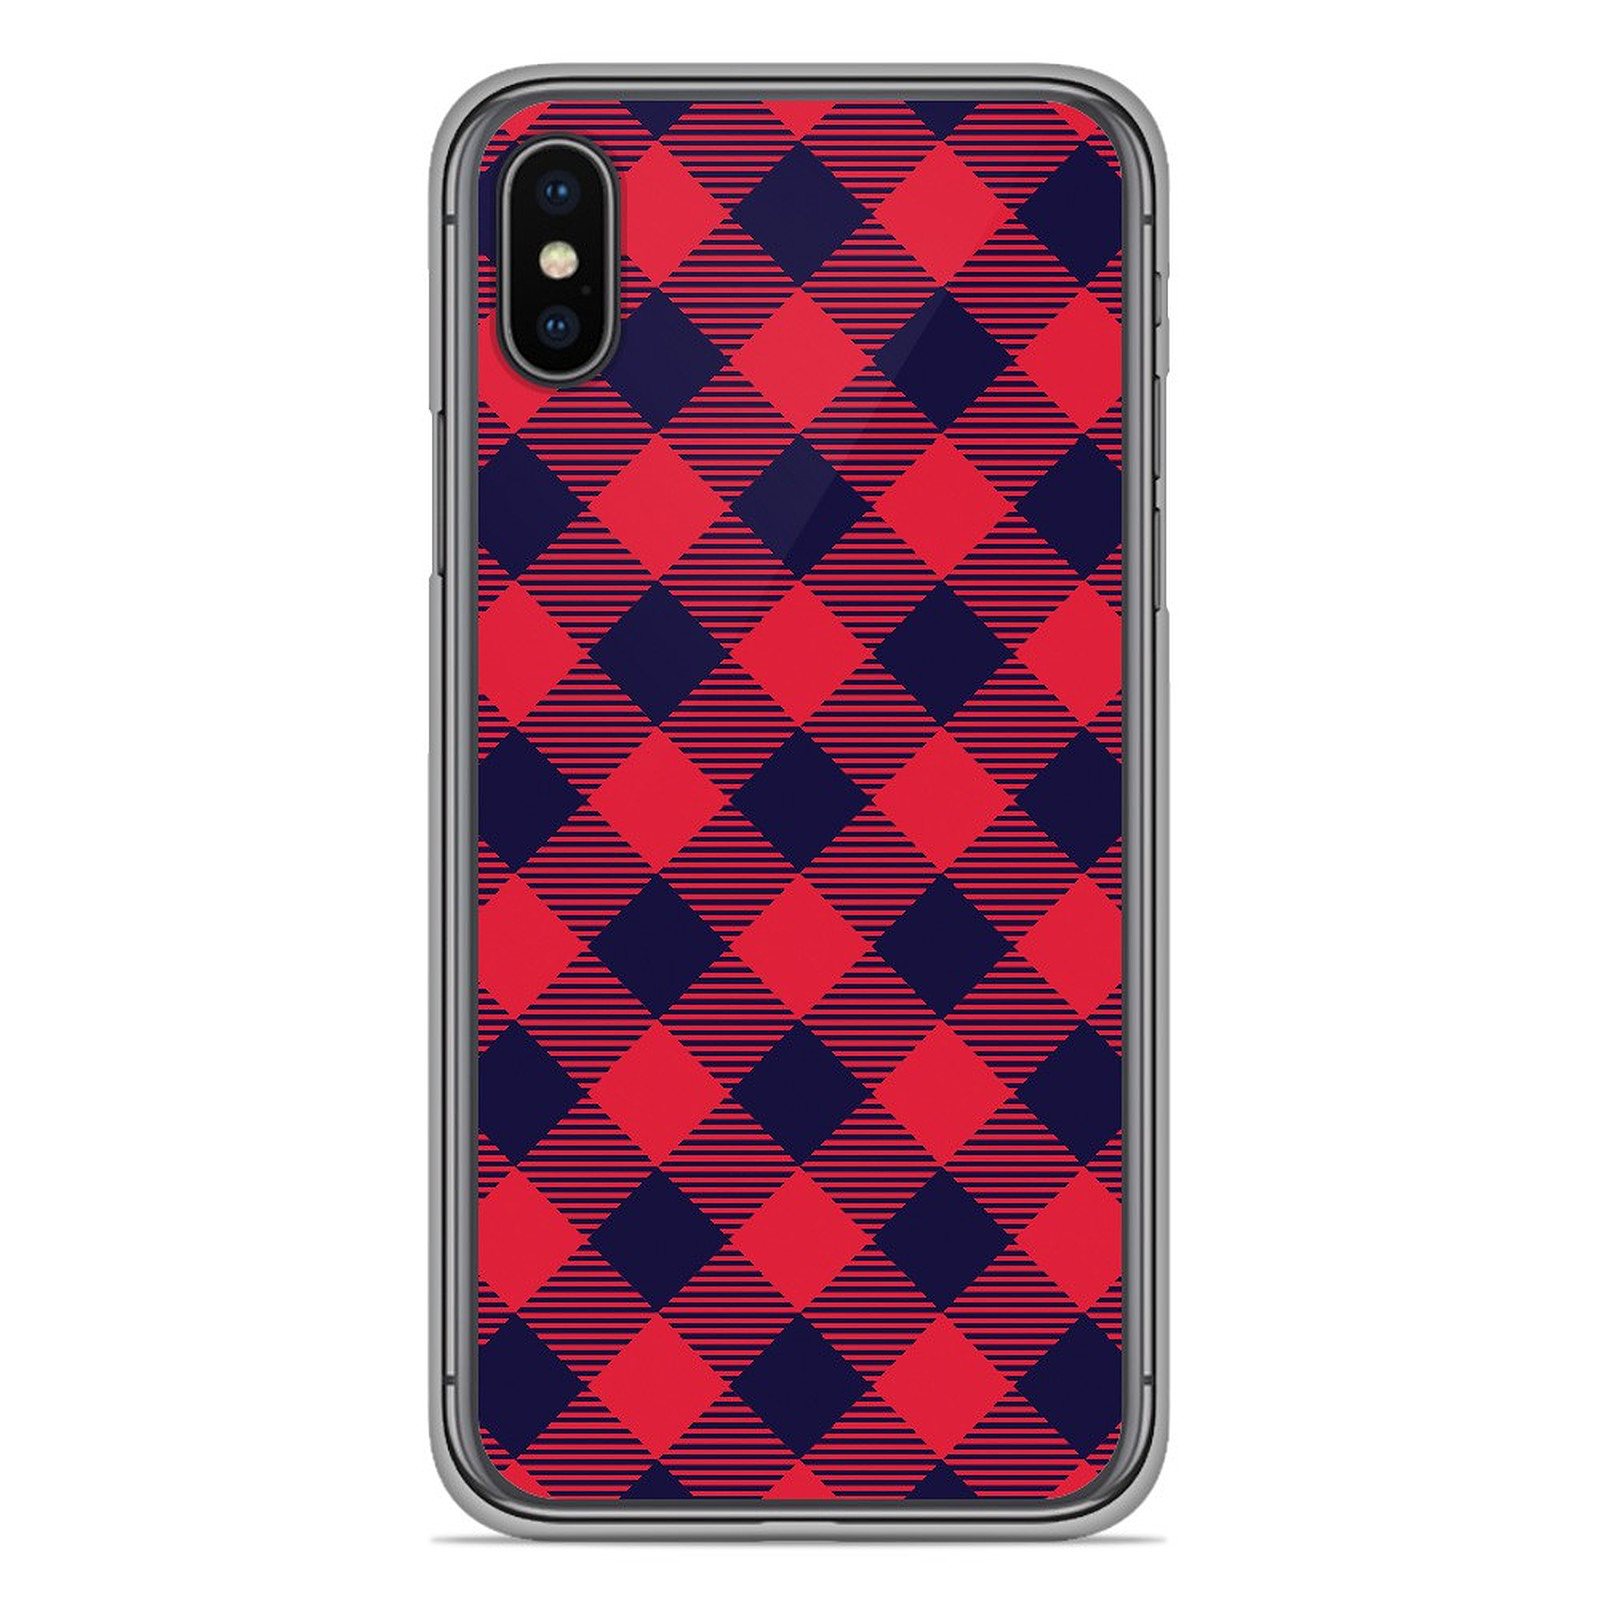 1001 Coques Coque silicone gel Apple iPhone X motif Tartan Rouge - Coque telephone 1001Coques